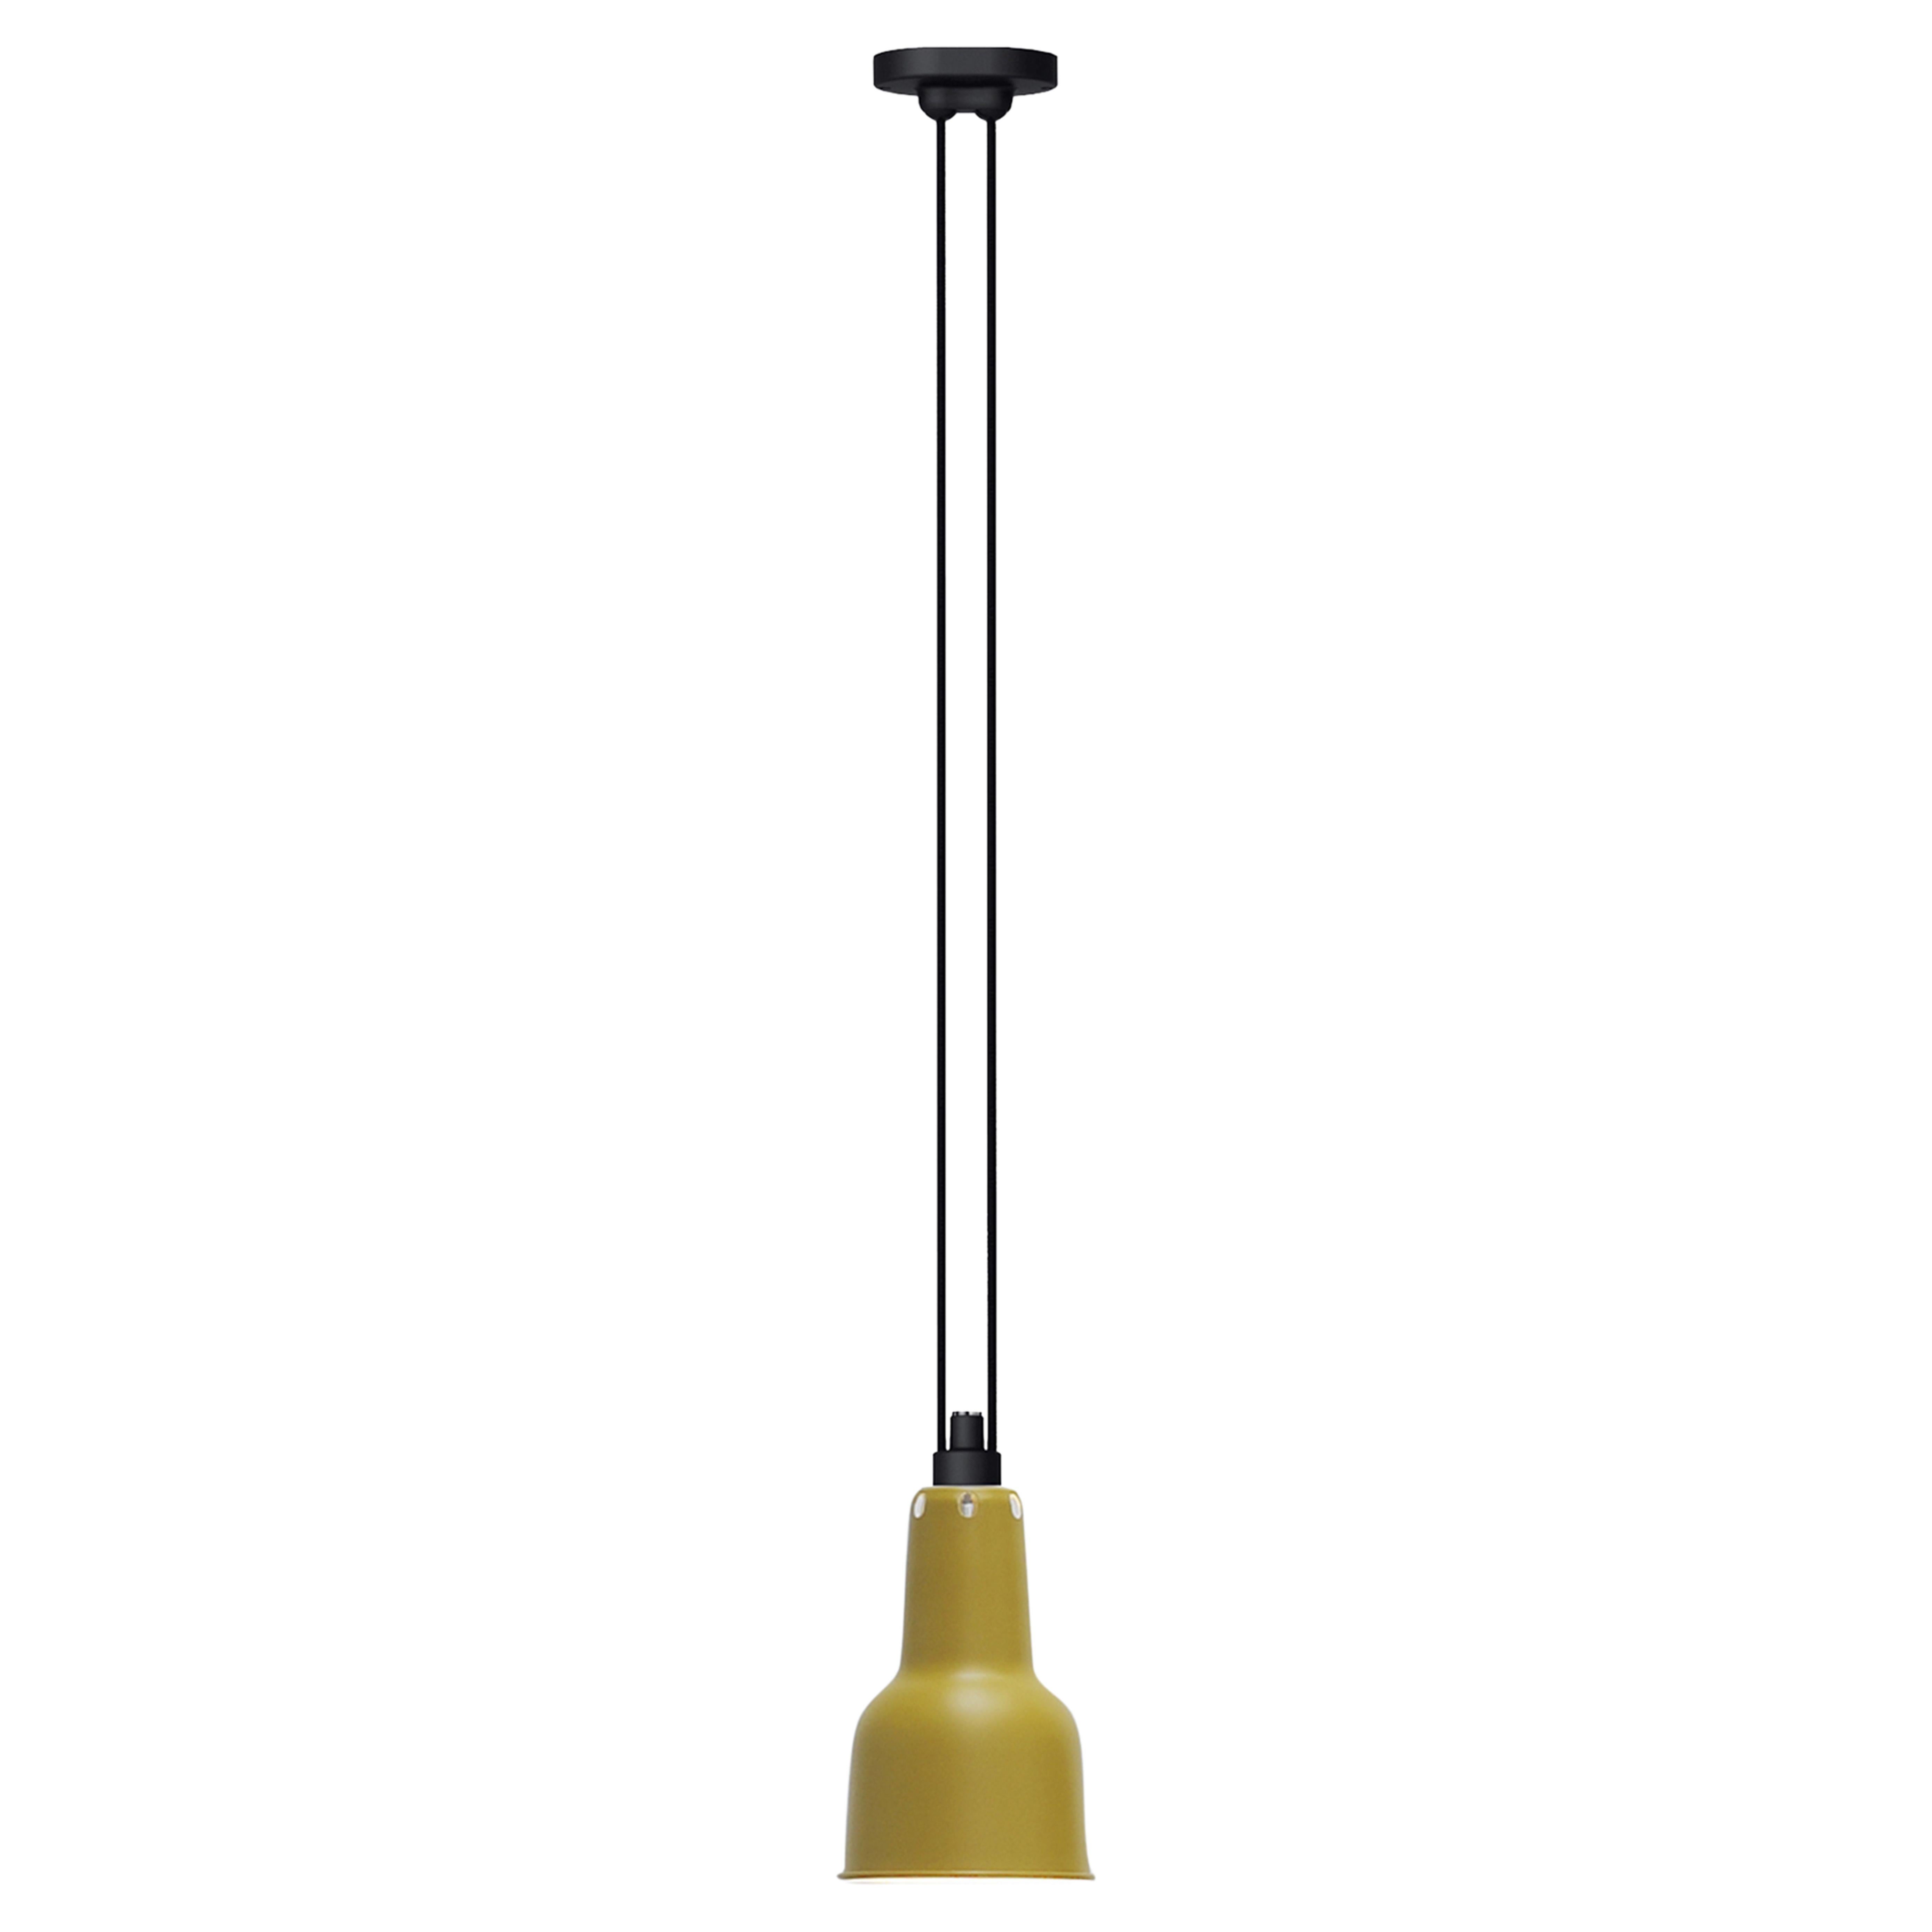 DCW Editions Les Acrobates N°322 Oculist Pendant Lamp in Yellow Shade For Sale